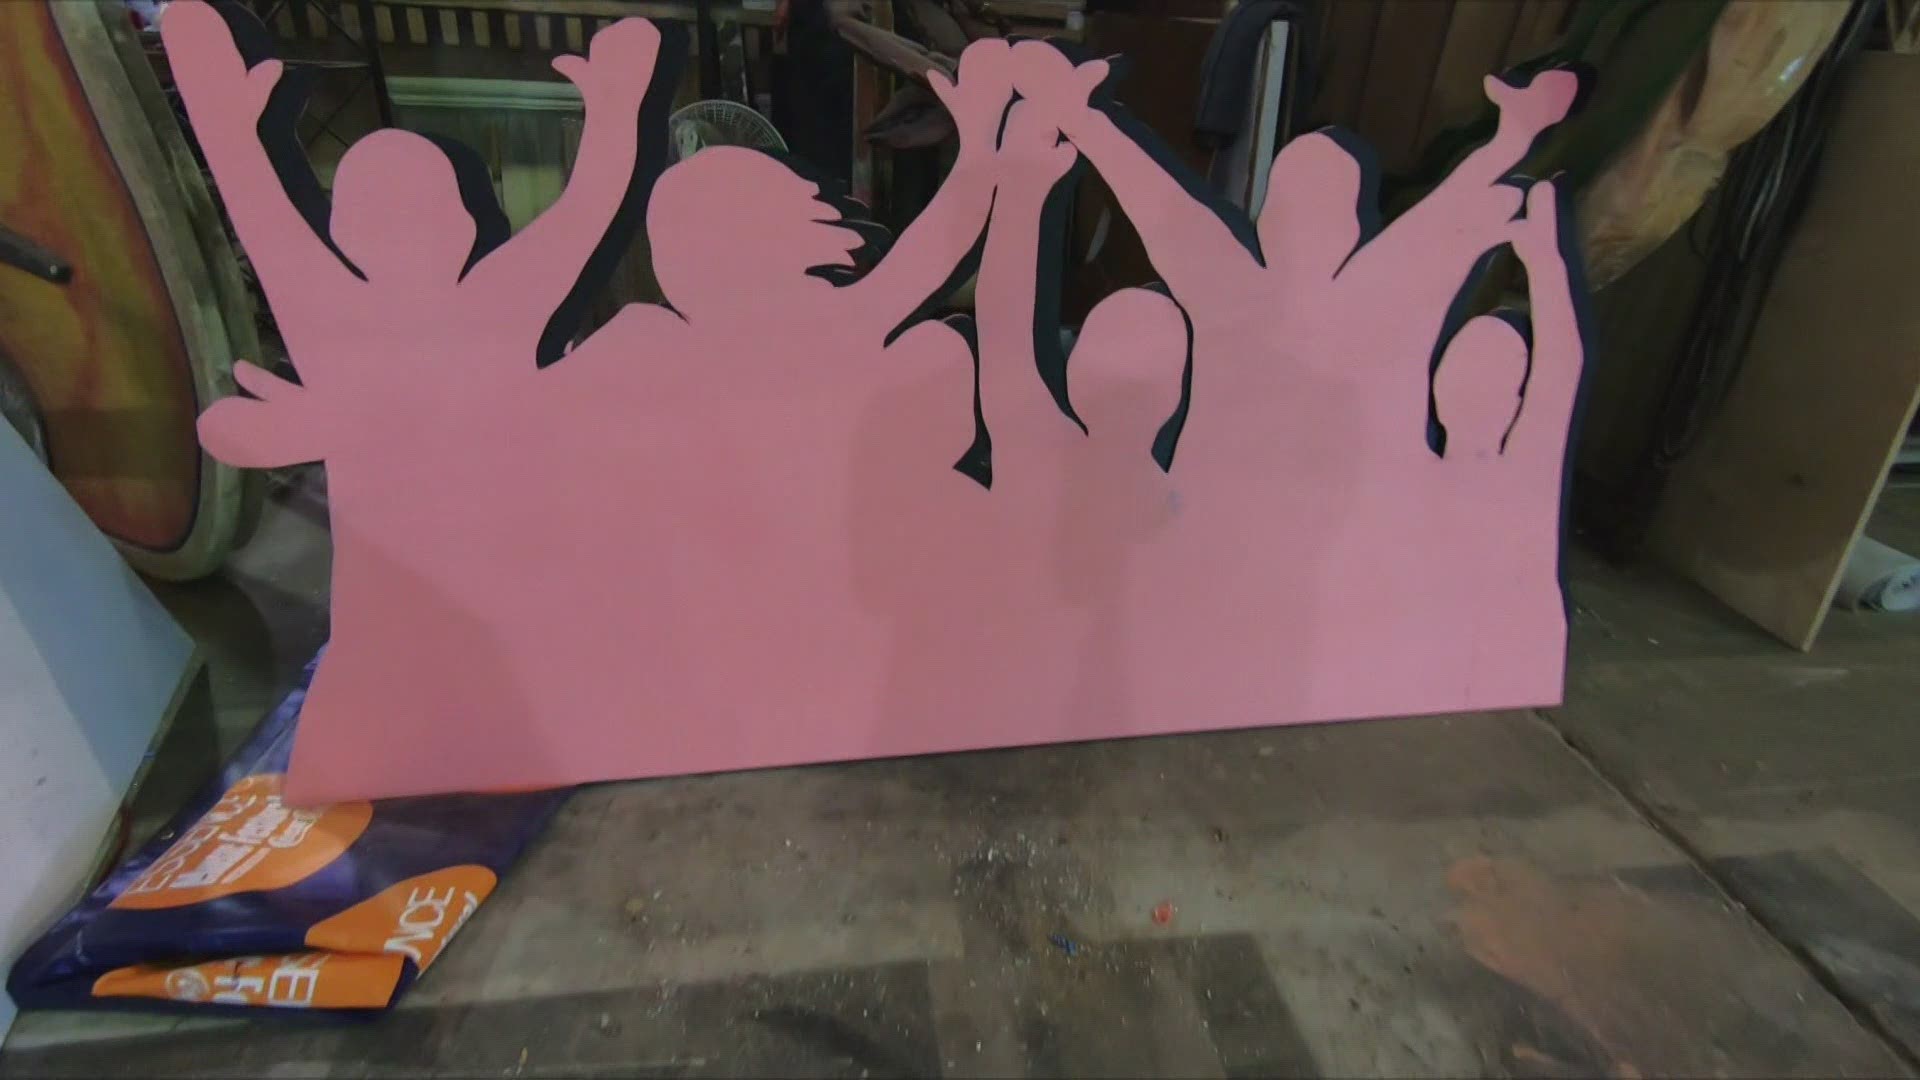 Coco Darrow thought her art studio might close but then the Krewe of House Floats happened.